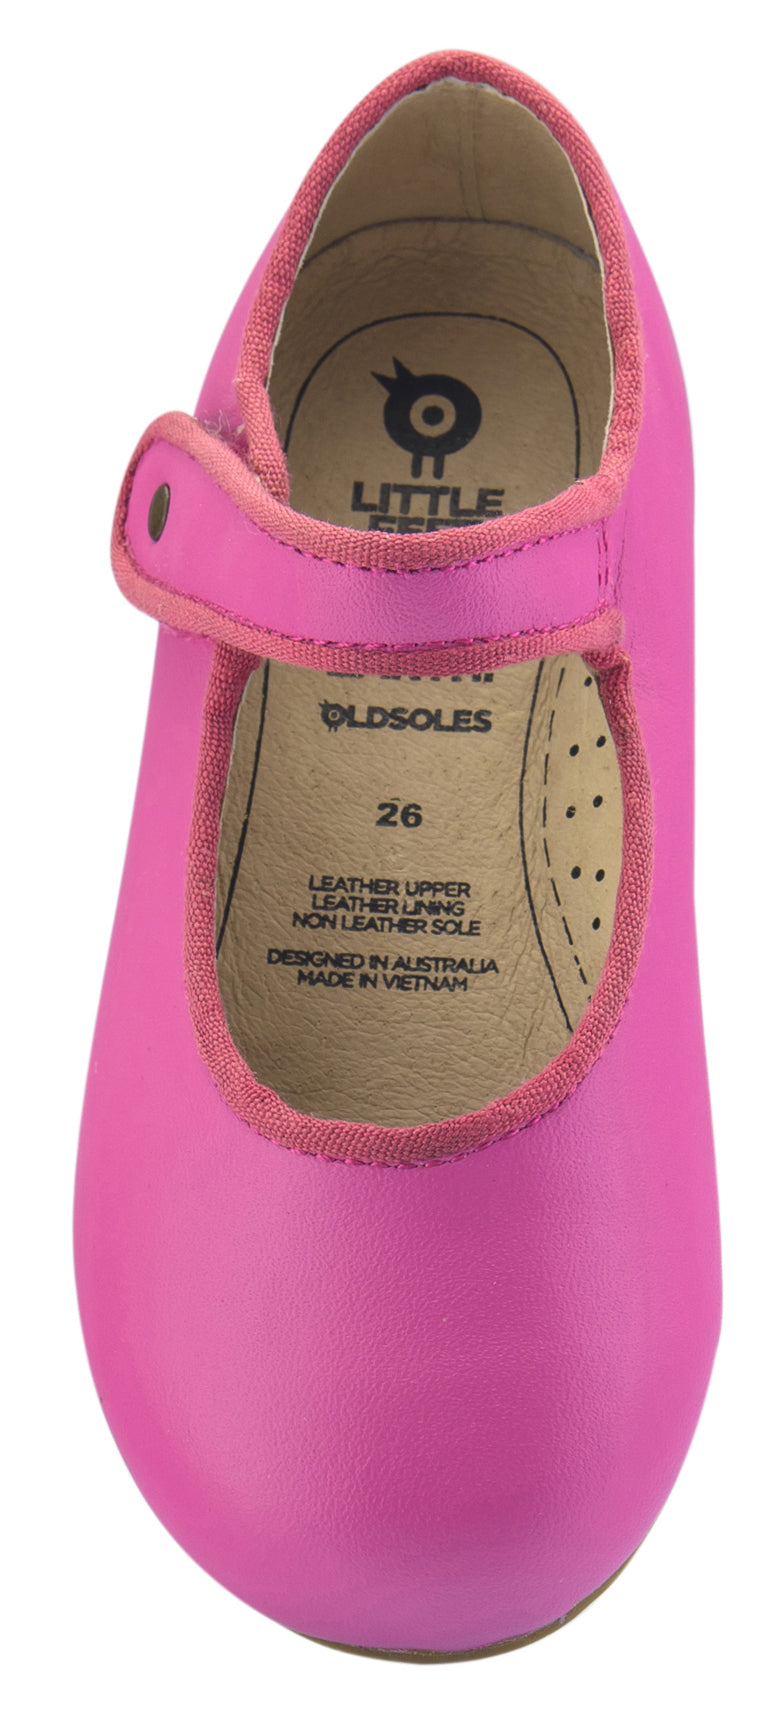 Old Soles Girl's Lady Jane Leather Mary Janes, Fuchsia